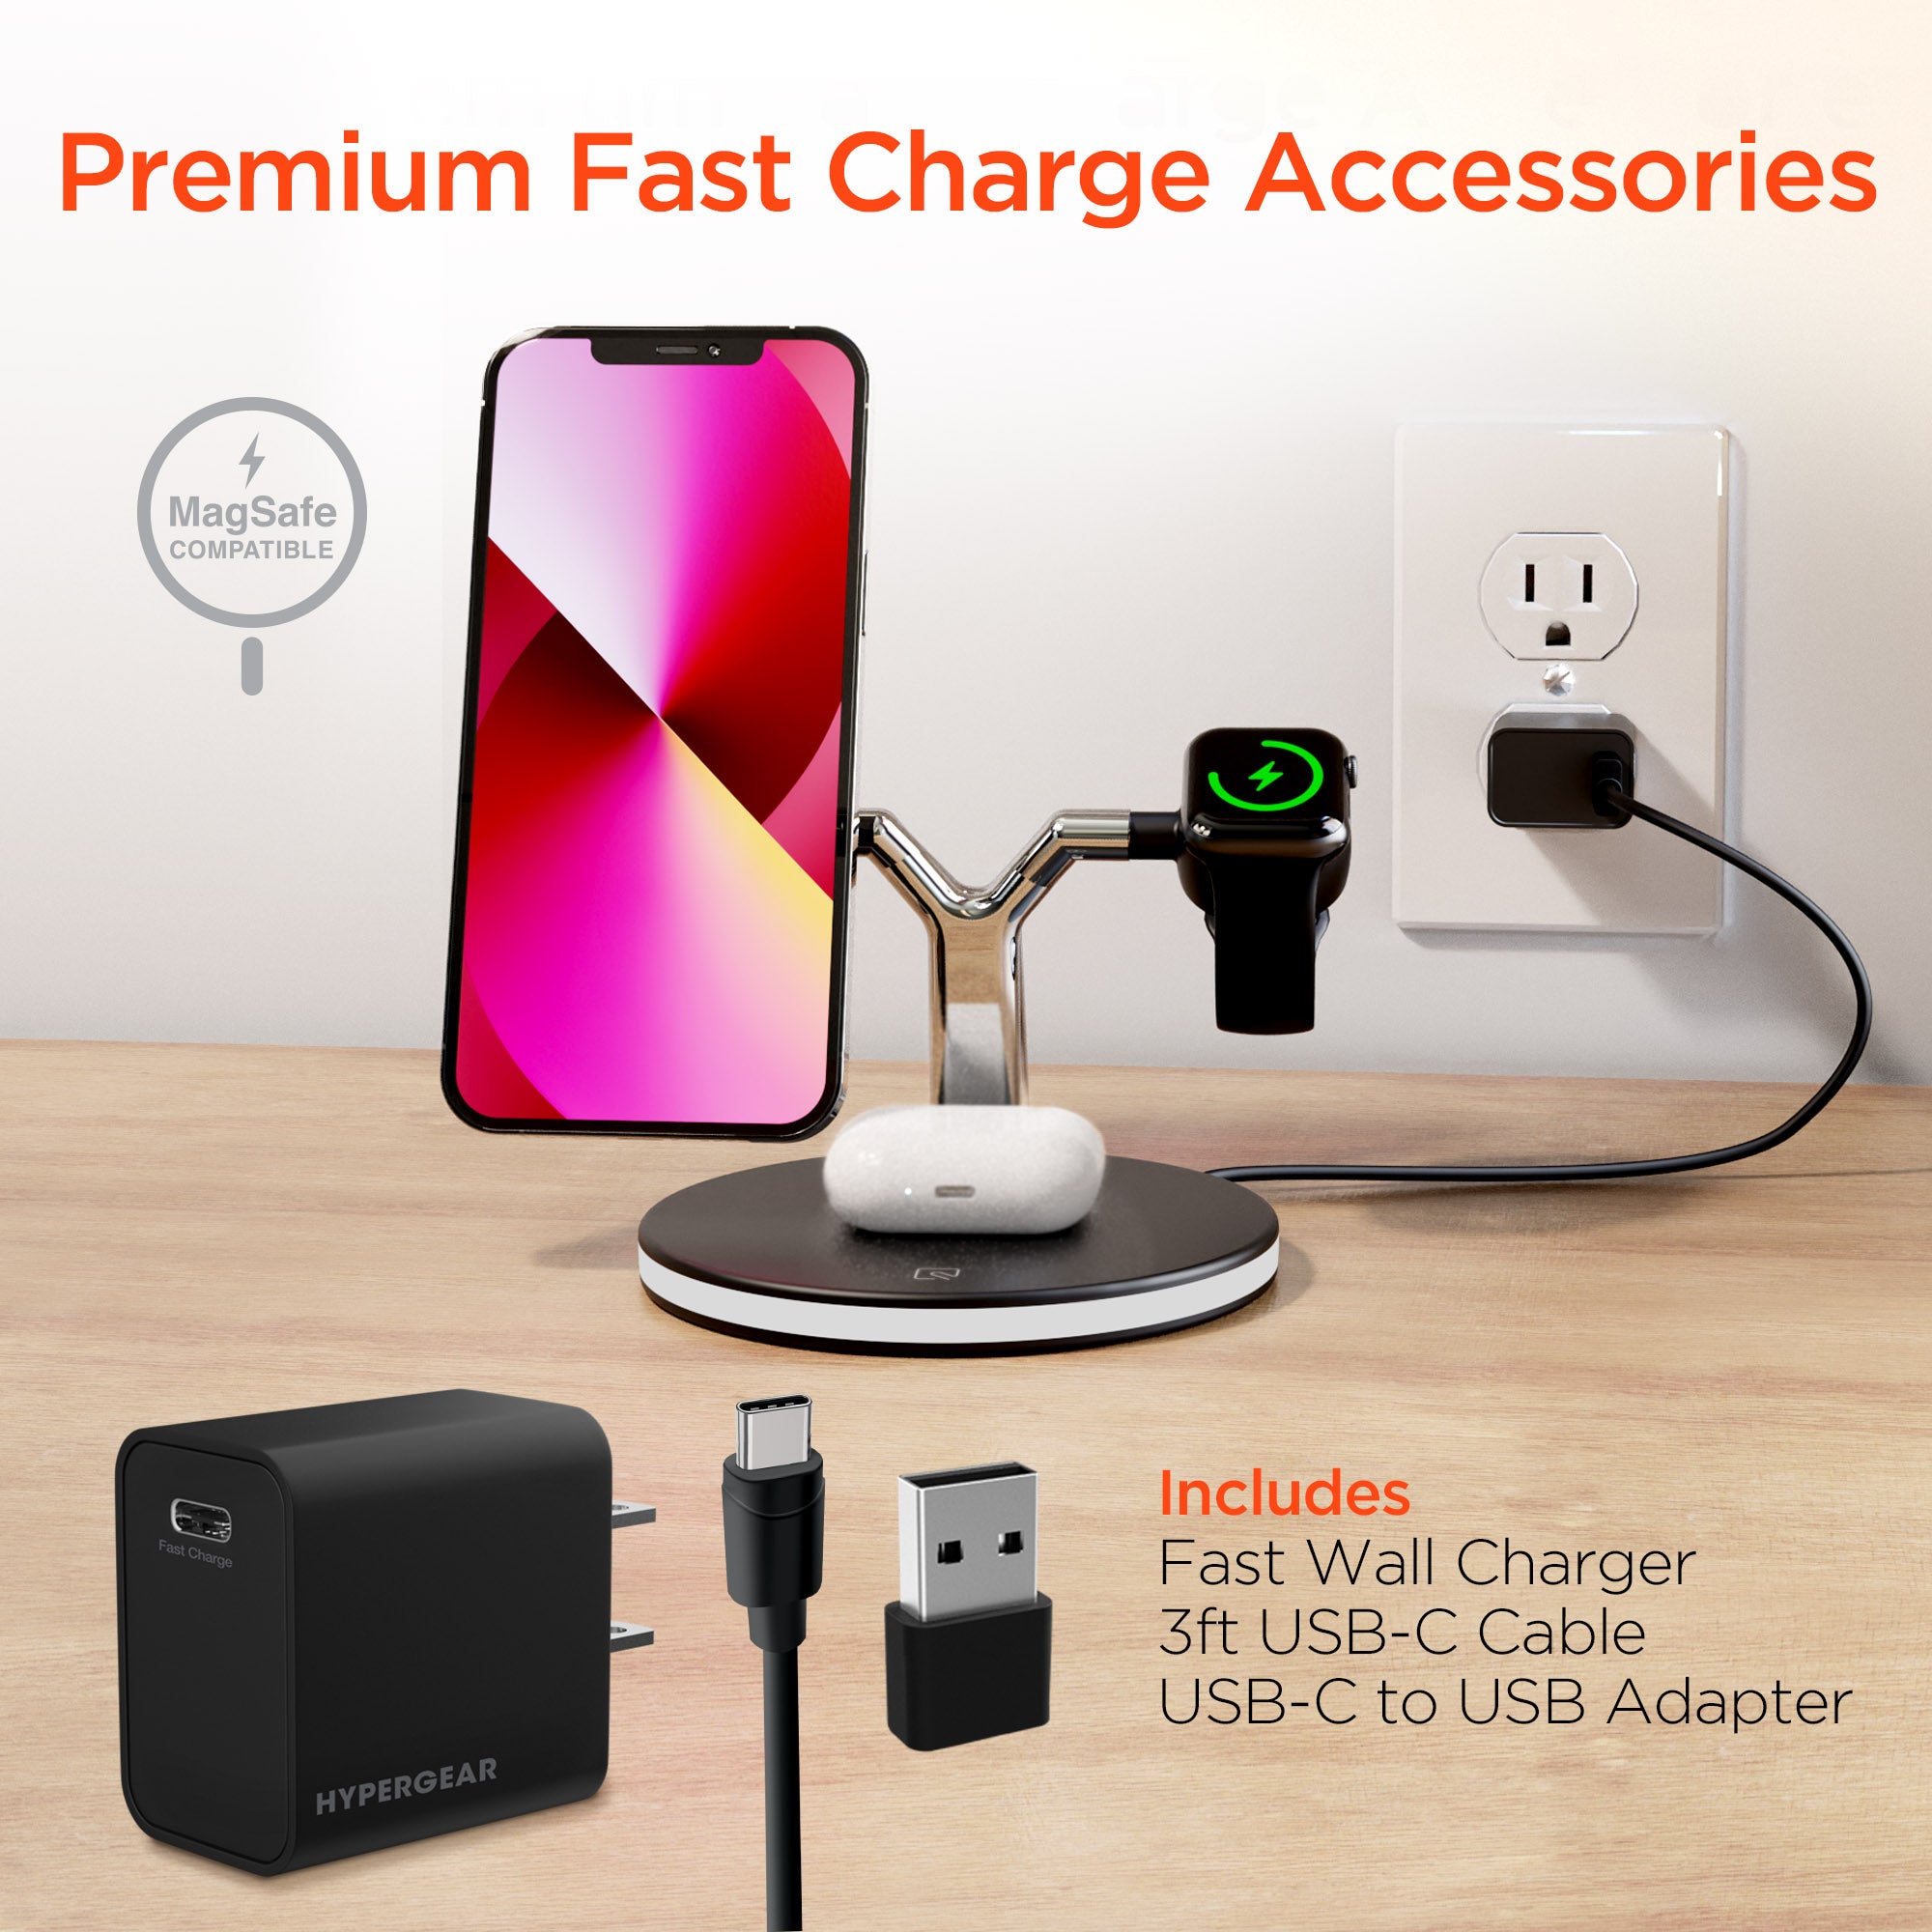 Dock Charger USB Fast Charging Cable Base Adapter Desktop Stand